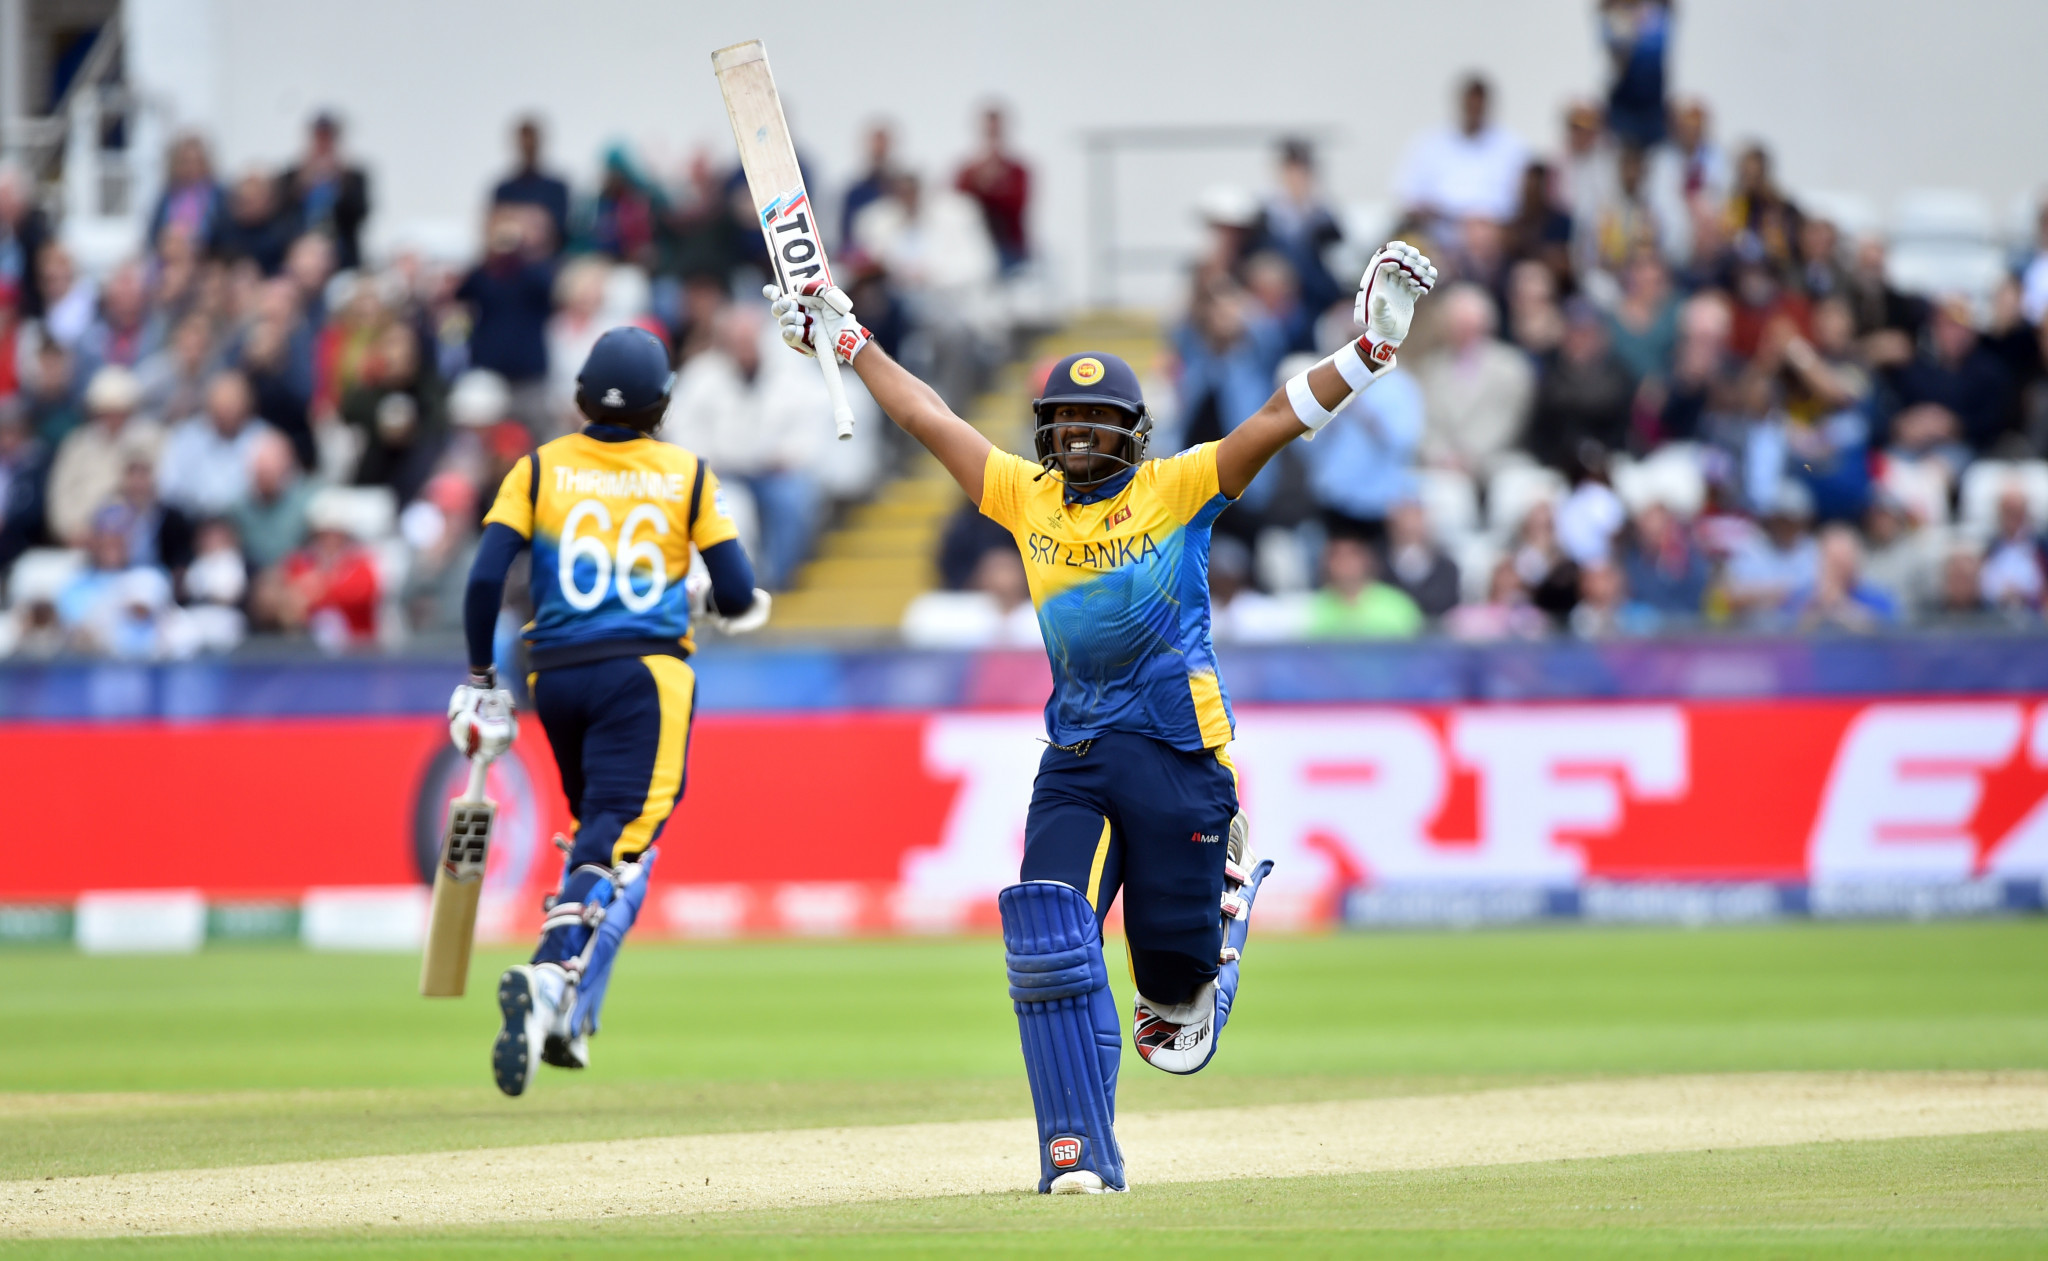 Avishka Fernando’s first international century overshadowed fellow young star Nicholas Pooran's as Sri Lanka edged a thrilling ICC Men’s World Cup clash with West Indies by 23 runs ©Getty Images